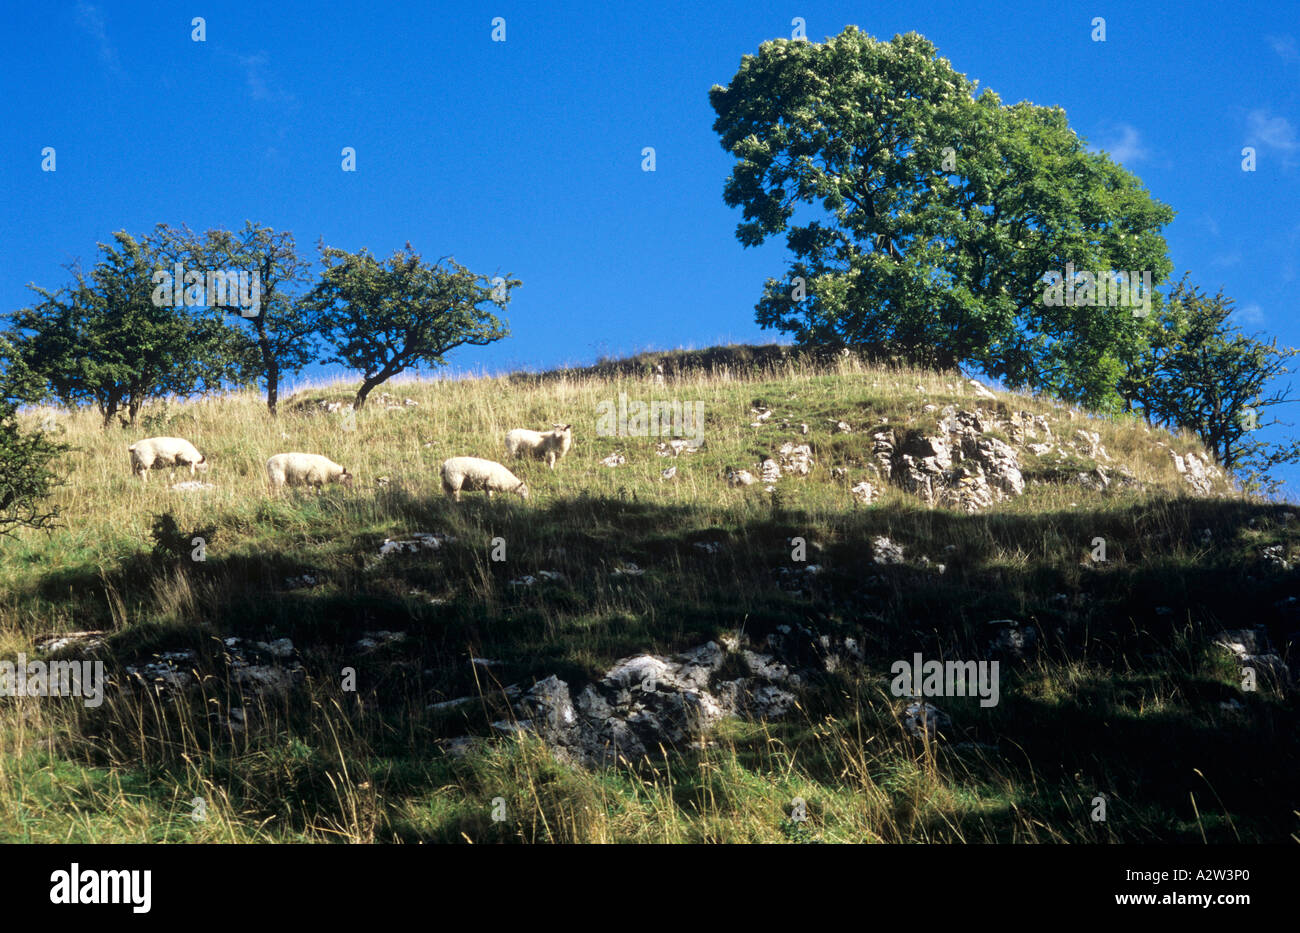 Sheep feeding on grass on a limestone bluff in the Peak District England UK and with a Common ash tree and bushes and blue sky Stock Photo